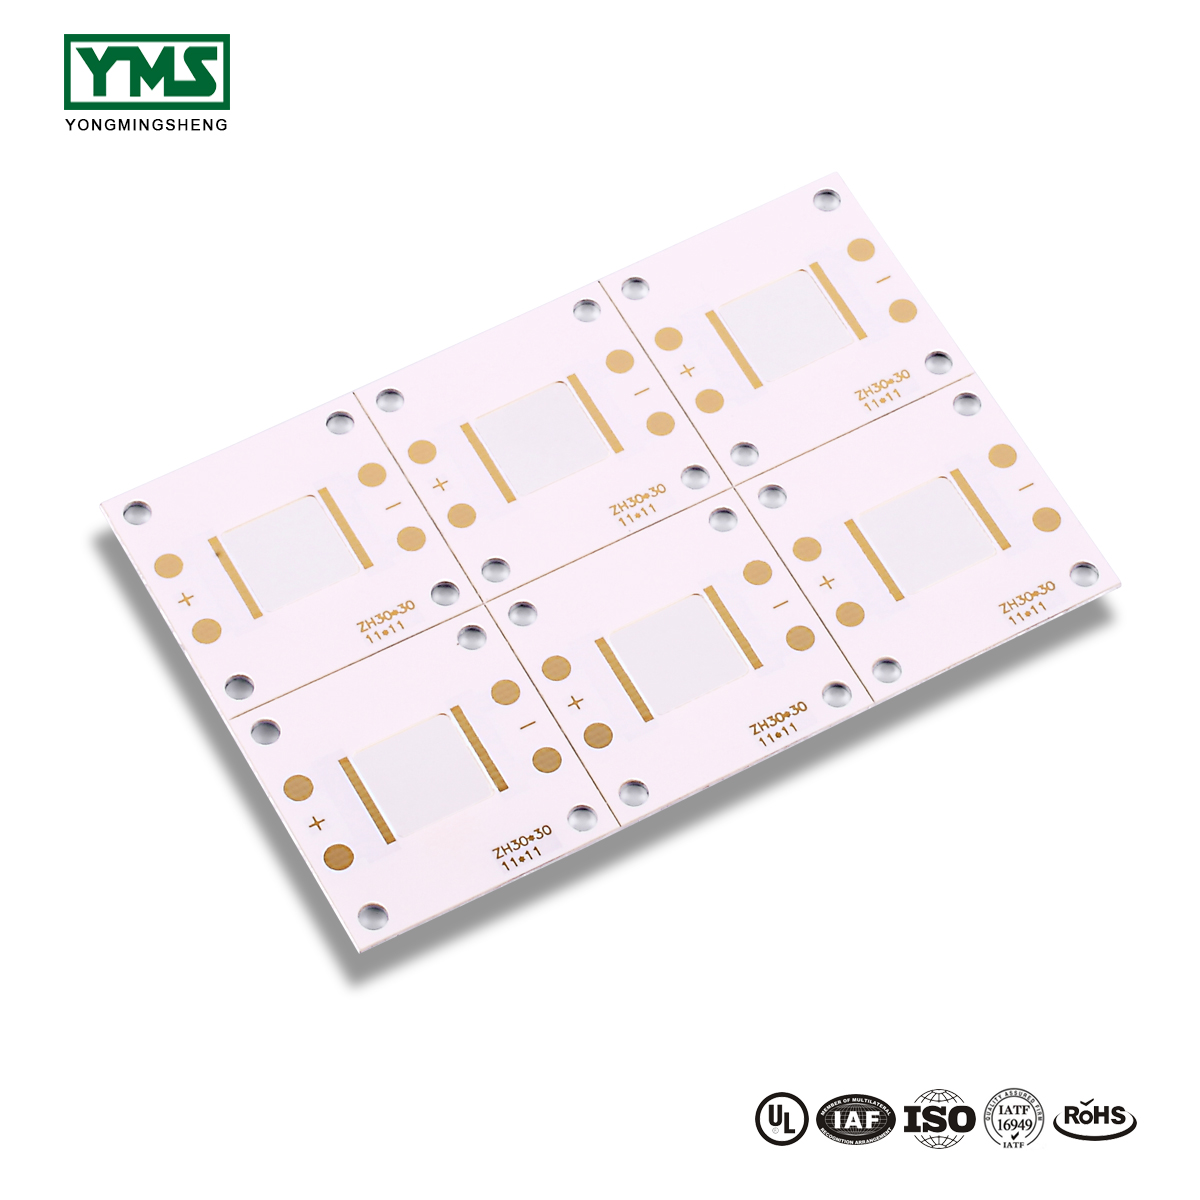 High Quality for Ceramic Insulation Board - 1Layer mirror Aluminum Base Board | YMSPCB – Yongmingsheng